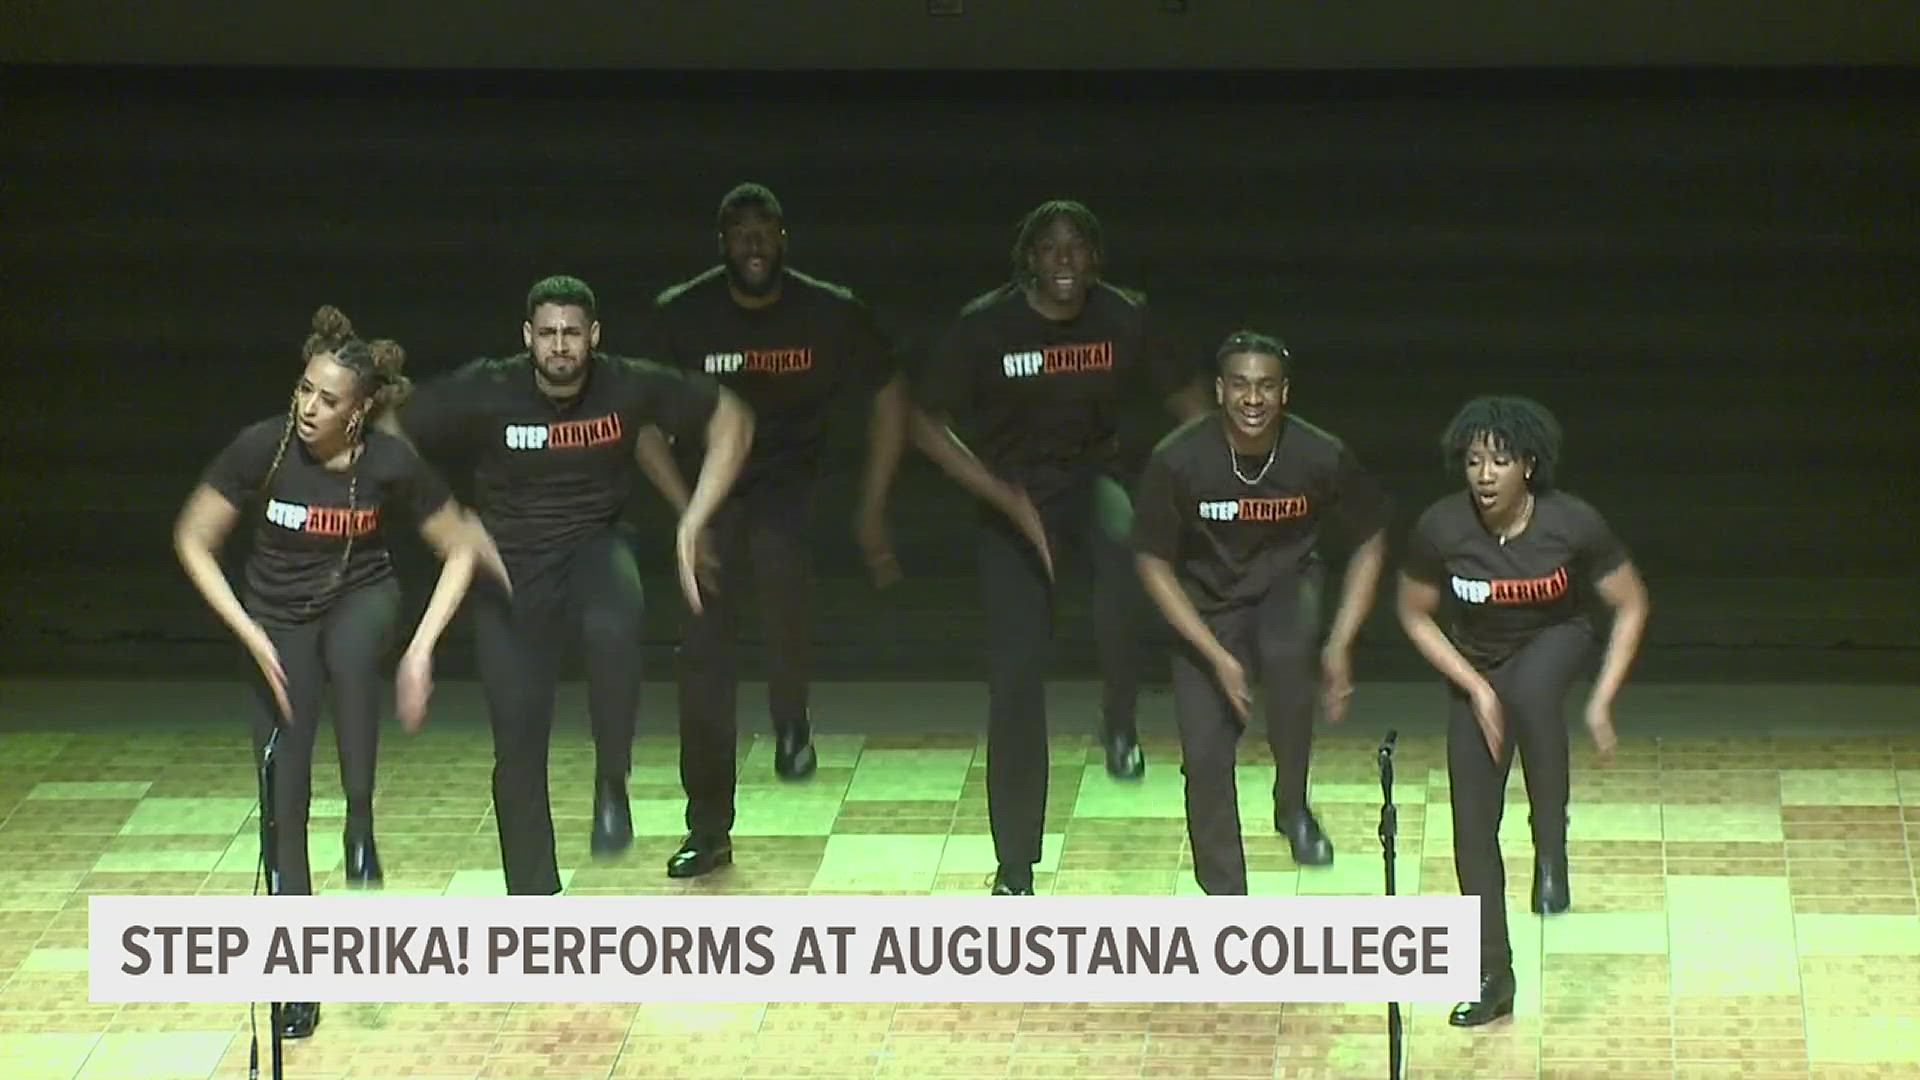 The Feb. 11 show at the school's Centennial Hall showcased percussive dance styles practiced by historically Black fraternities and sororities.